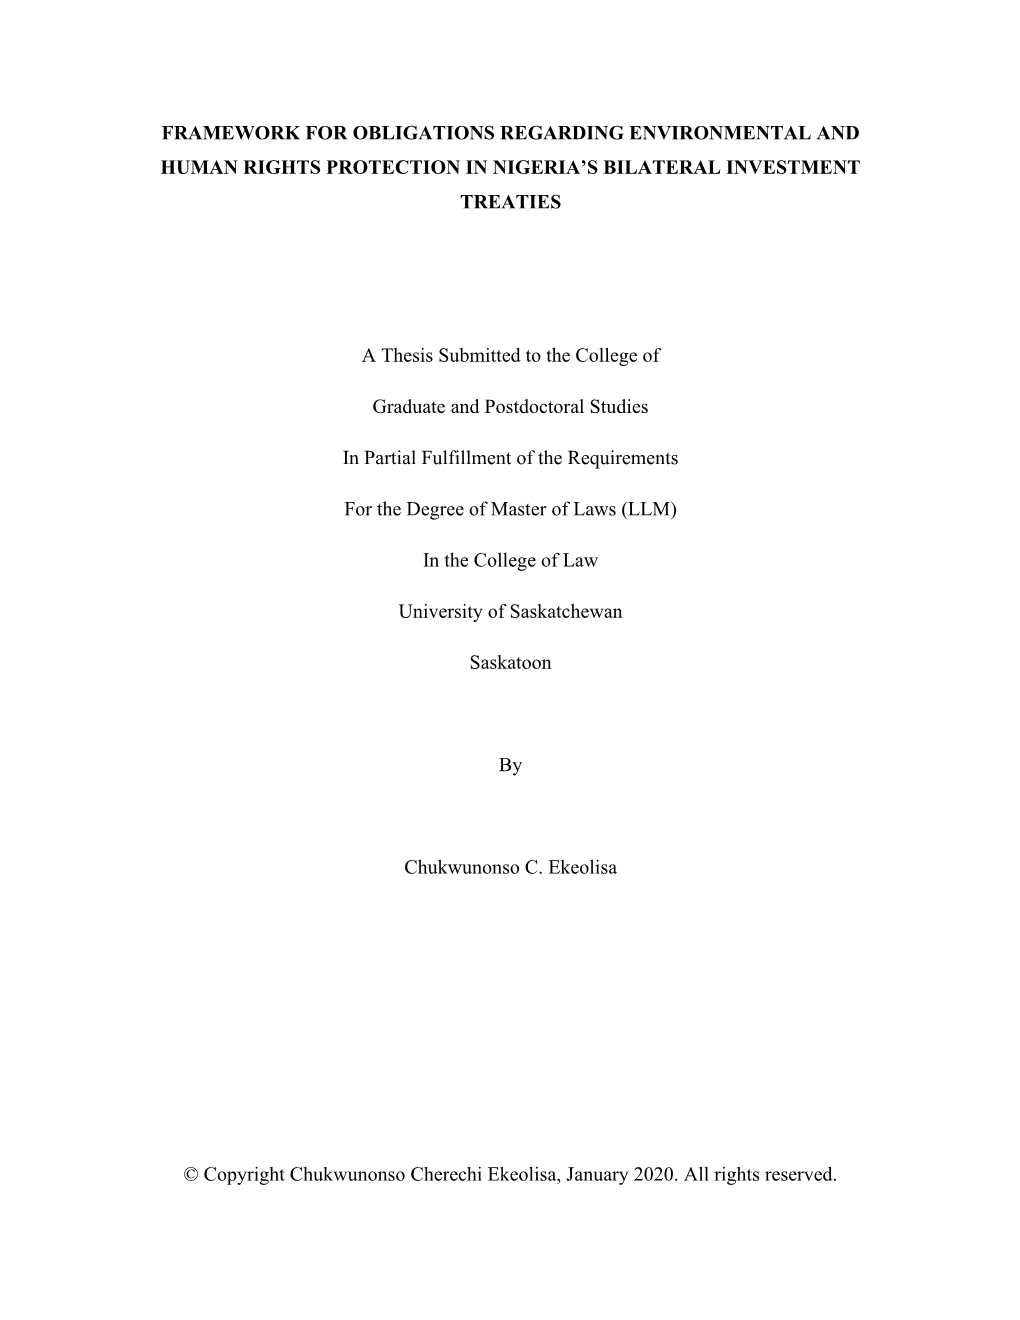 Framework for Obligations Regarding Environmental and Human Rights Protection in Nigeria’S Bilateral Investment Treaties